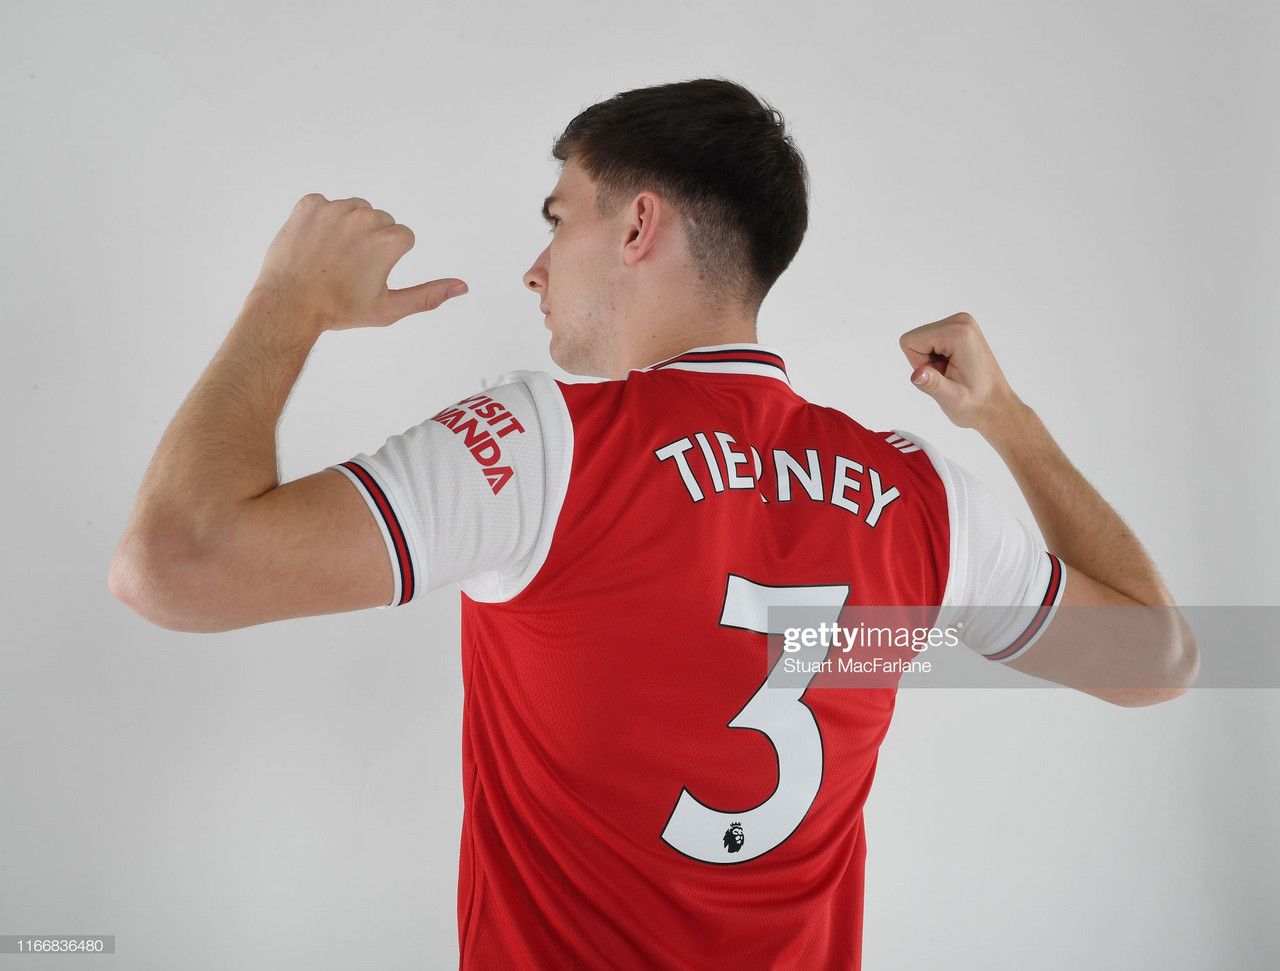 Arsenal sign Kieran Tierney on a long-term contract from Celtic